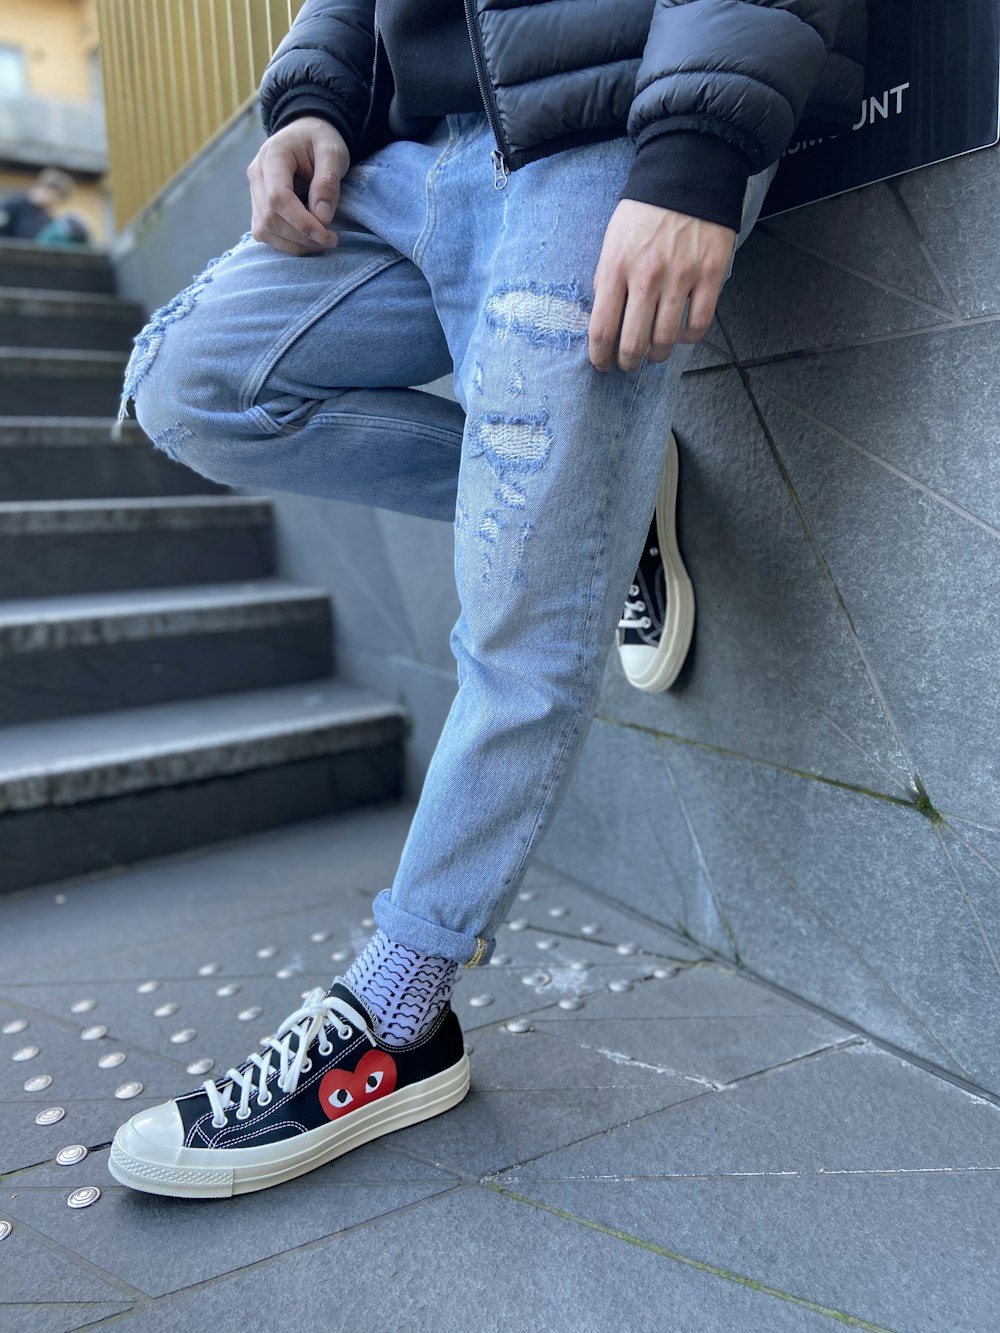 Mexico cualquier cosa George Hanbury Person in blue denim jeans and black and white converse all star high top  sneakers photo – Free London Image on Unsplash